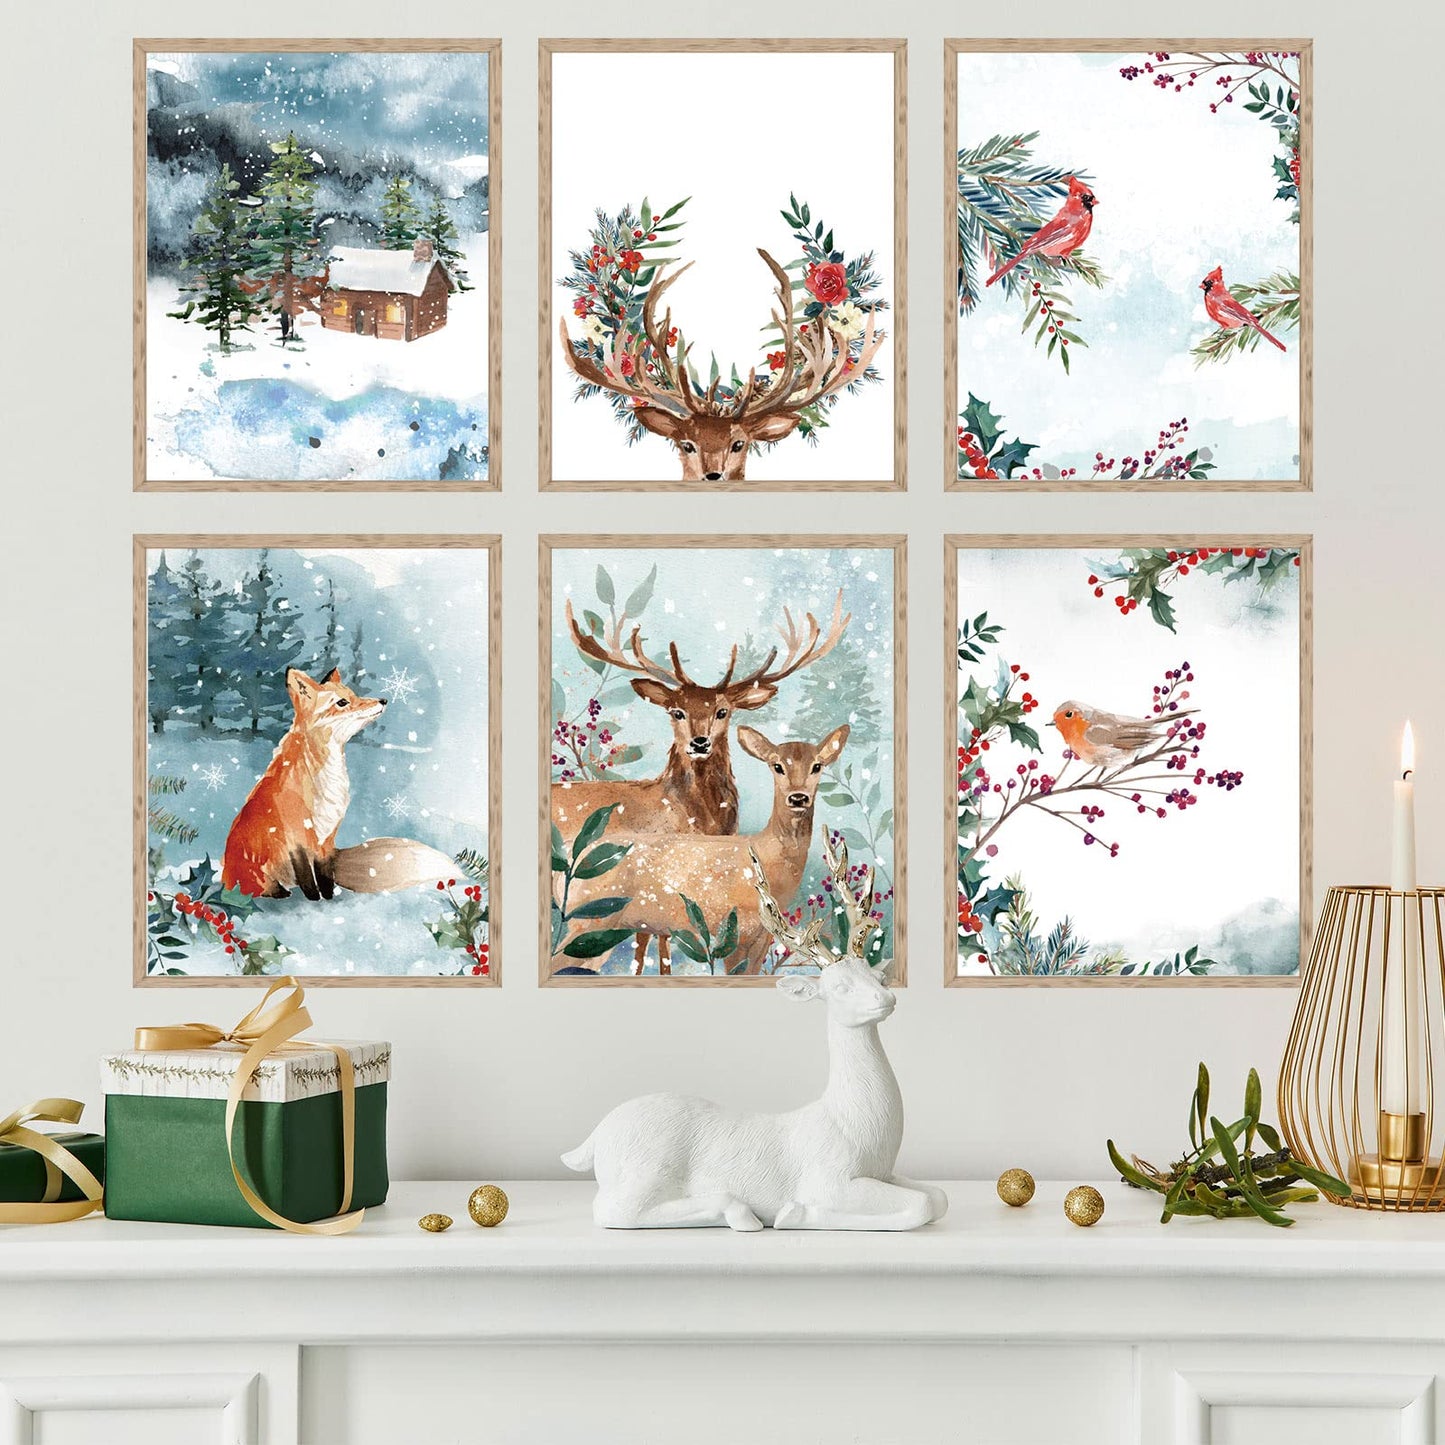 AnyDesign 9Pcs Christmas Wall Art Prints Watercolor Woodland Posters Decorative Natural Xmas Tree Reindeer Forest Art Posters for Home Gallery Living Room Bedroom Decor, 8 x 10 Inch, Unframed